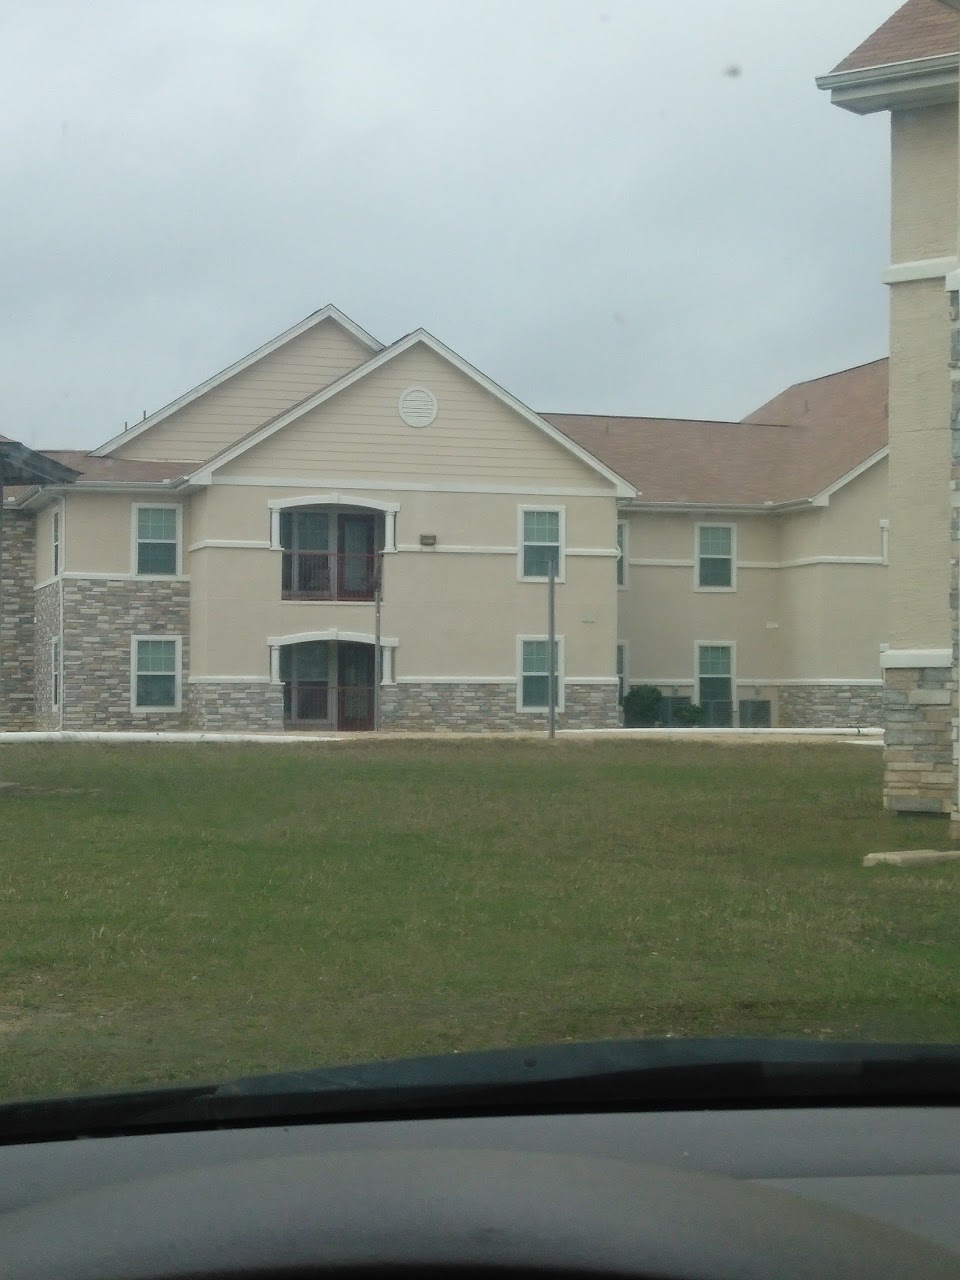 Photo of TAYLOR HEIGHTS APTS. Affordable housing located at 2313 OLD MOBILE AVE PASCAGOULA, MS 39567